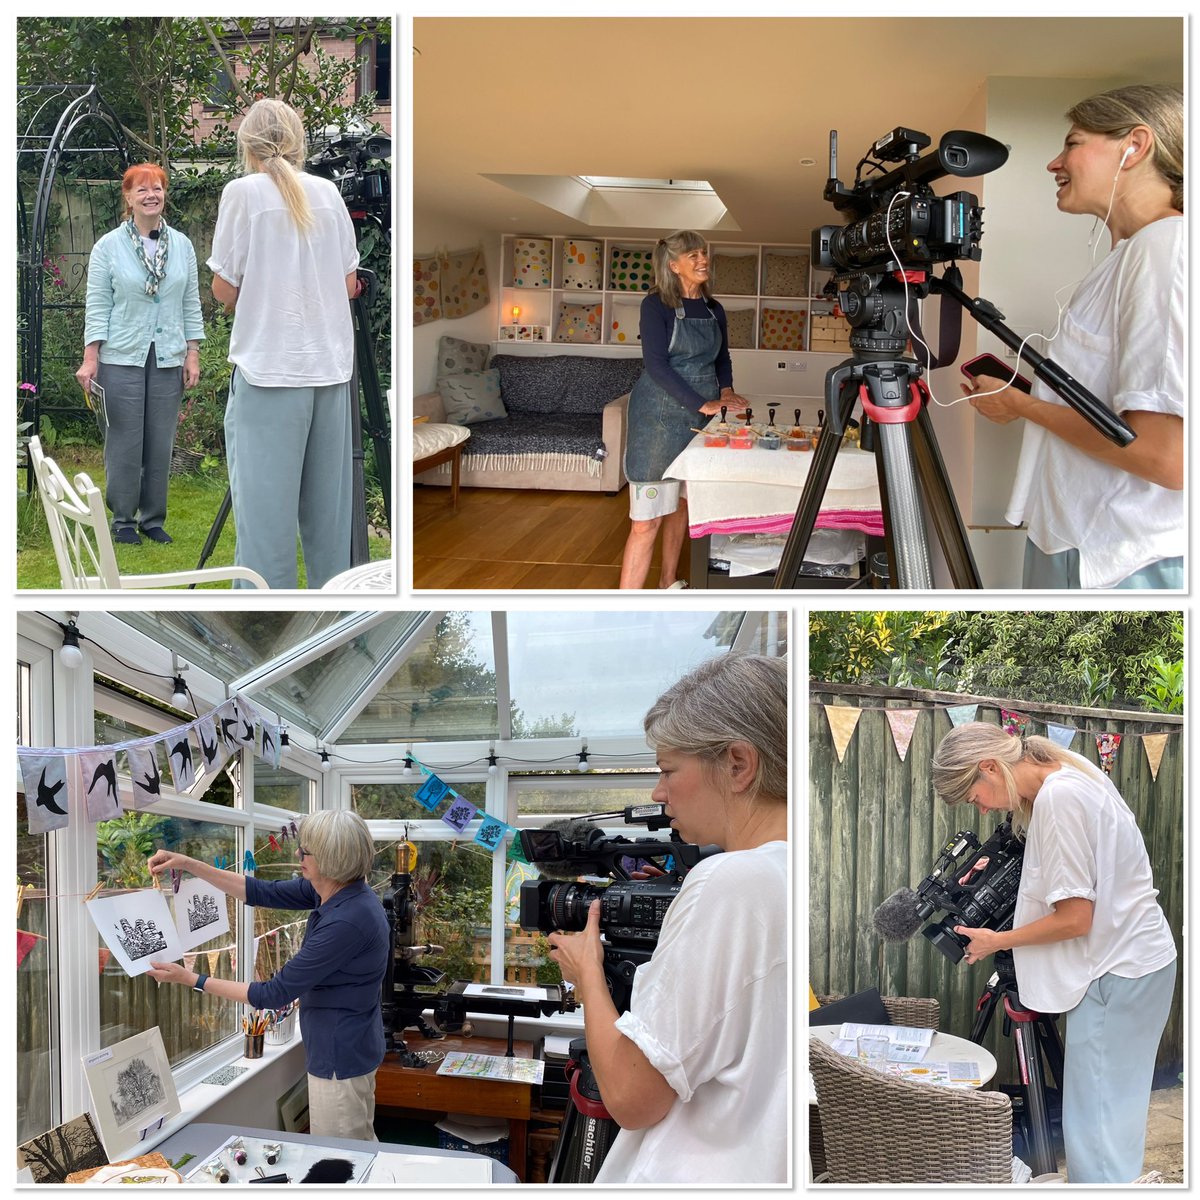 Tune into ITV News West Country 19:05 this evening (Saturday) to see Viv Styles  @VivStylz  Susie Honnor and Gillian Taylor @gillianartist  talking about Devon Open Studios 😀 #DevonOpenStudios  @itvwestcountry